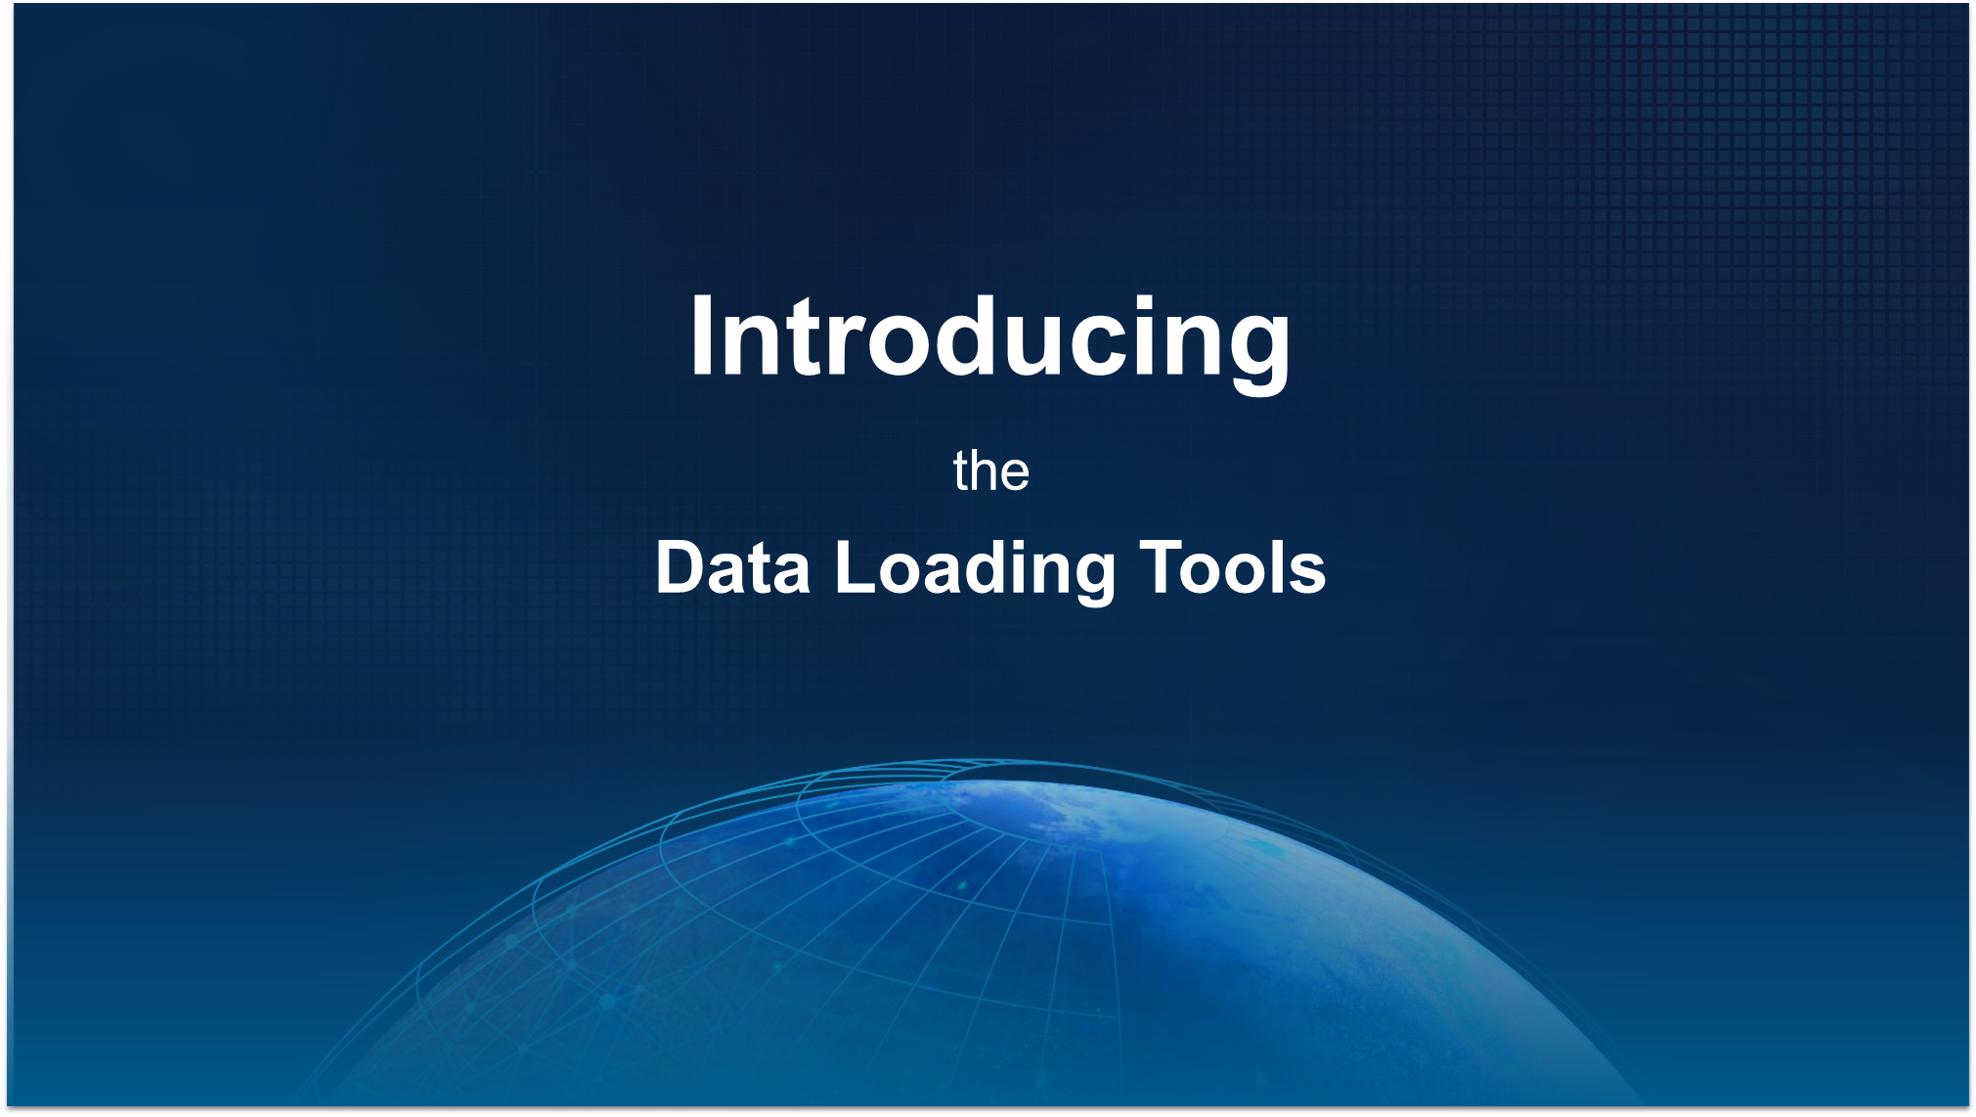 Introducing the Data Loading Tools